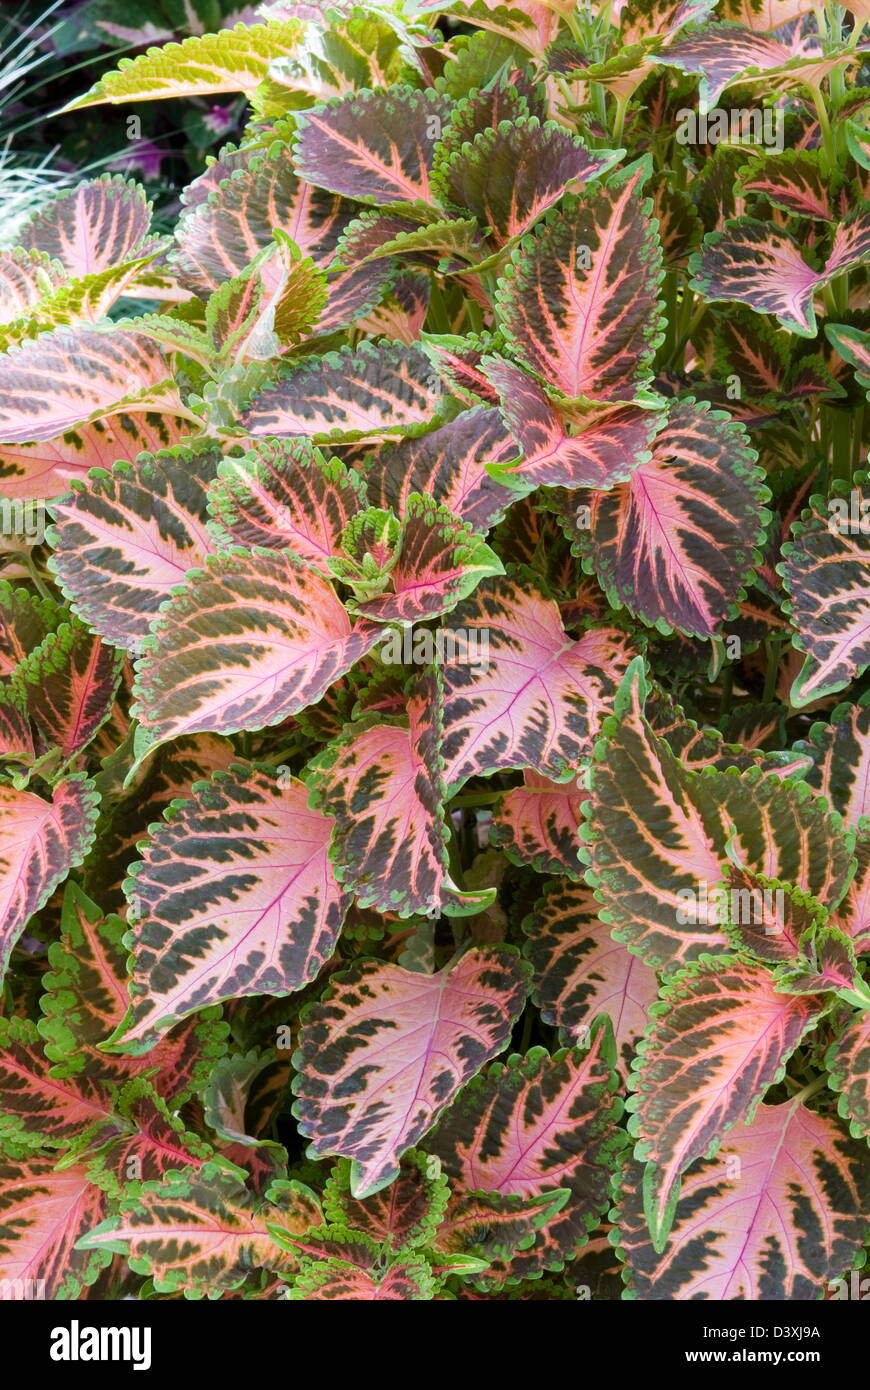 Coleus Wizard 'Coral Sunrise' Date: 03.11.2008 Ref: ZB907 123496 0004 COMPULSORY CREDIT: Photos Horticultural/Photoshot Stock Photo